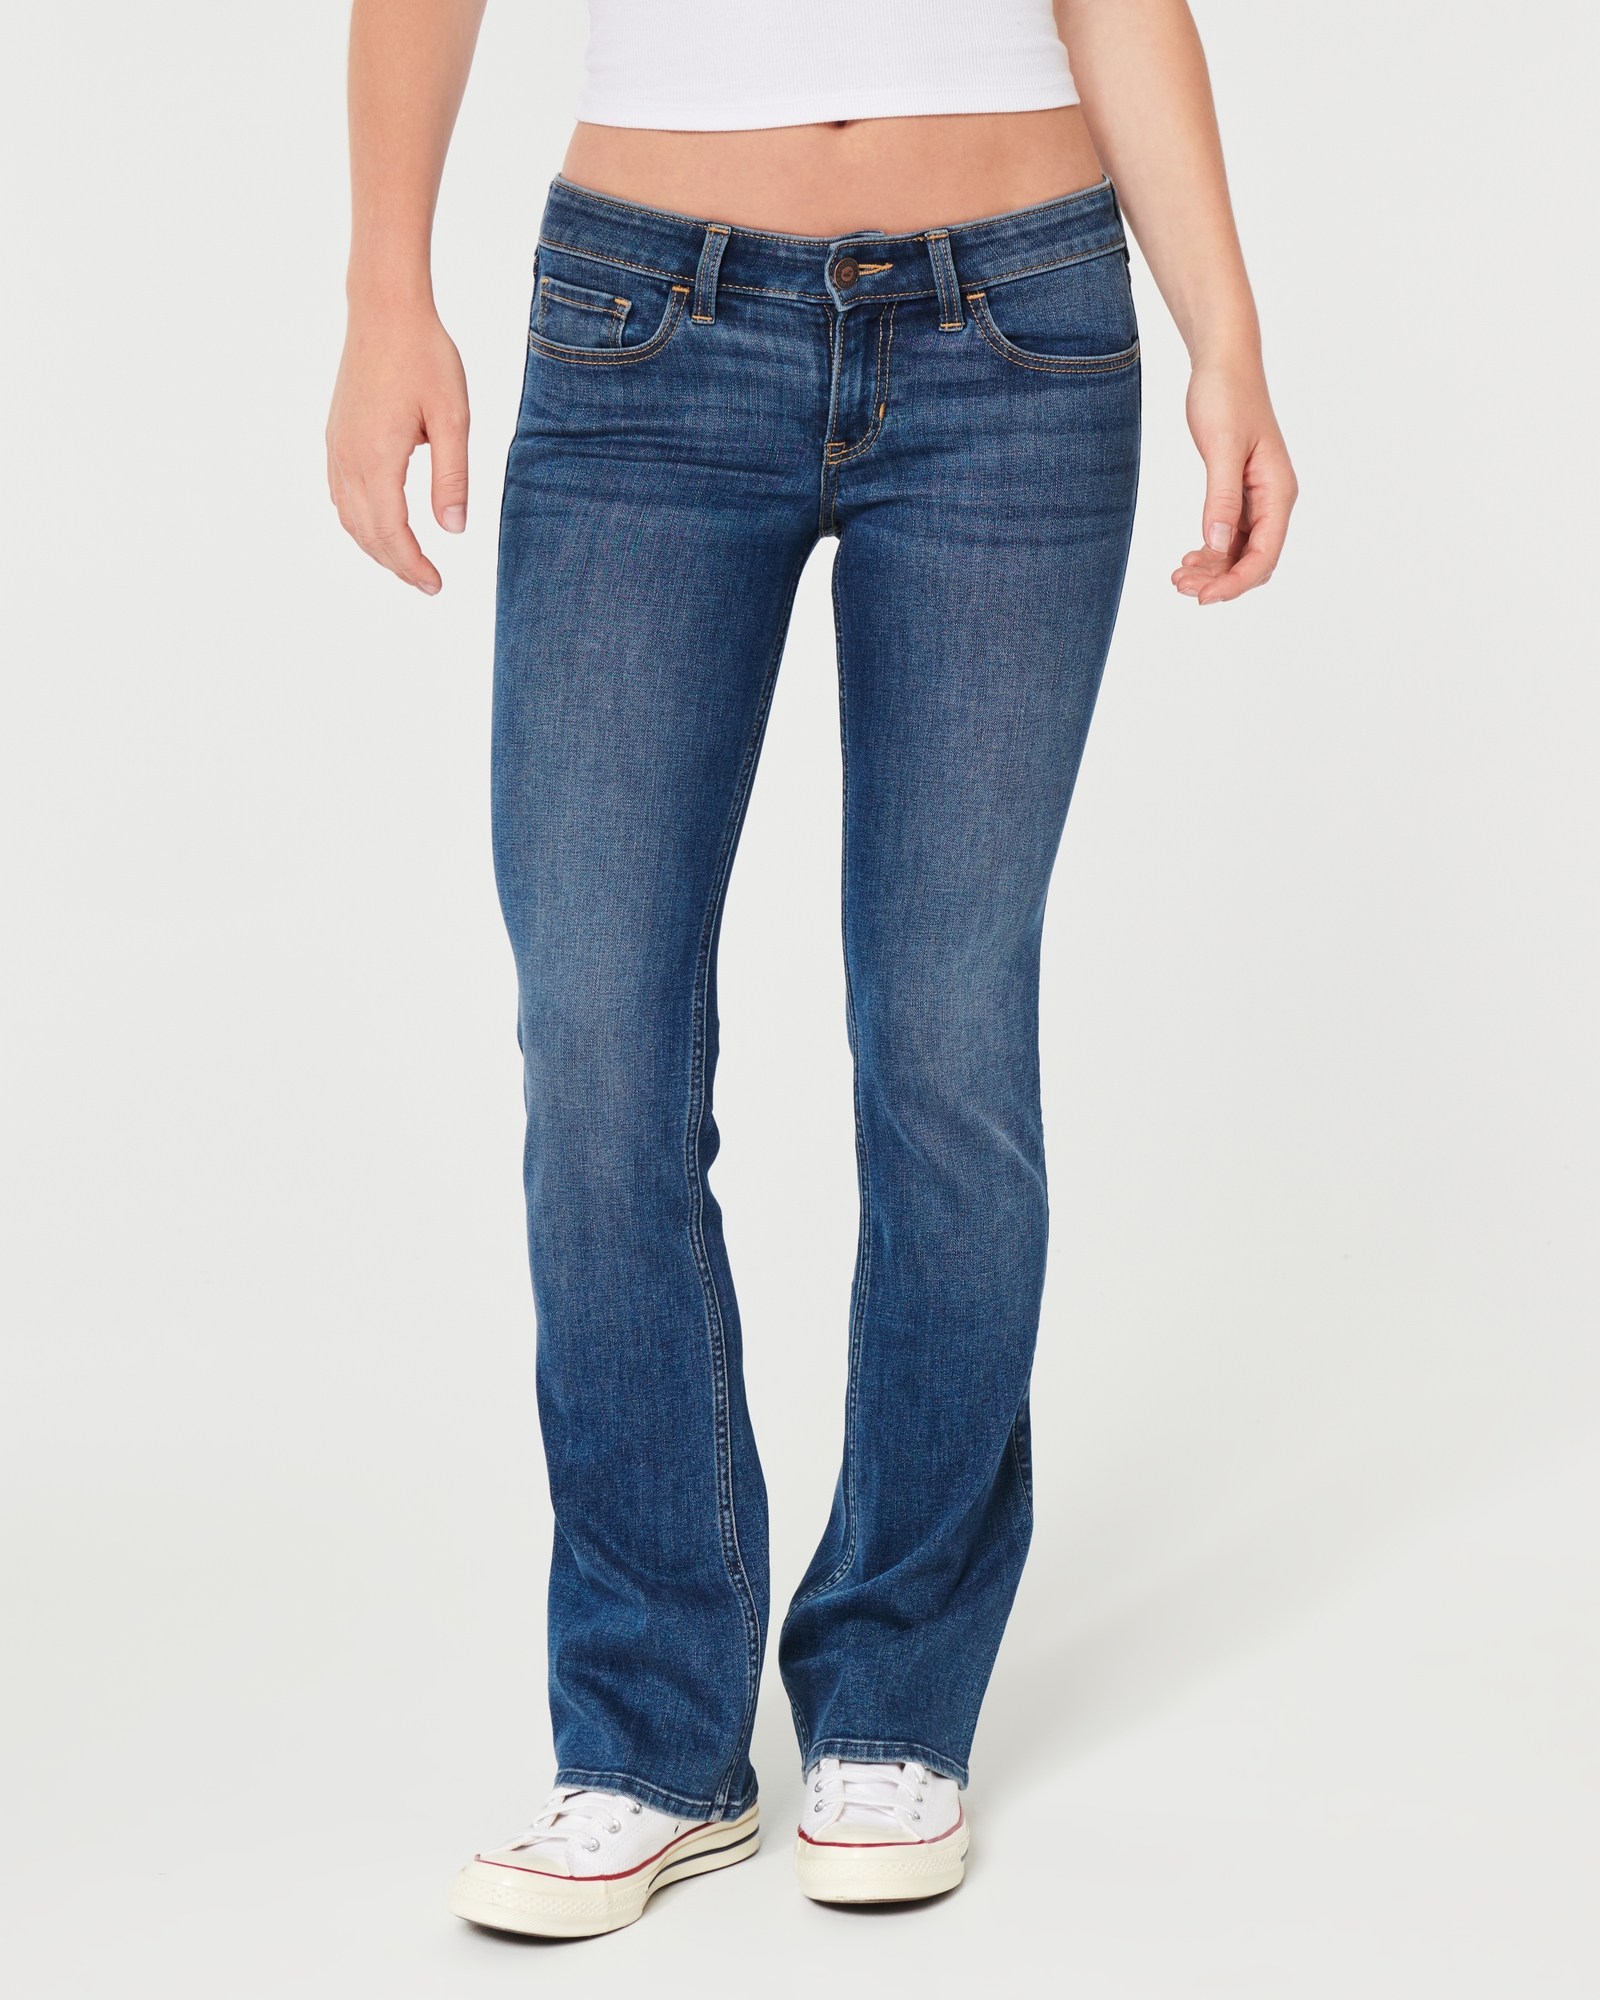 Hollister Co. DOUBLE SHANK BOOT - Flared Jeans - black/blue 